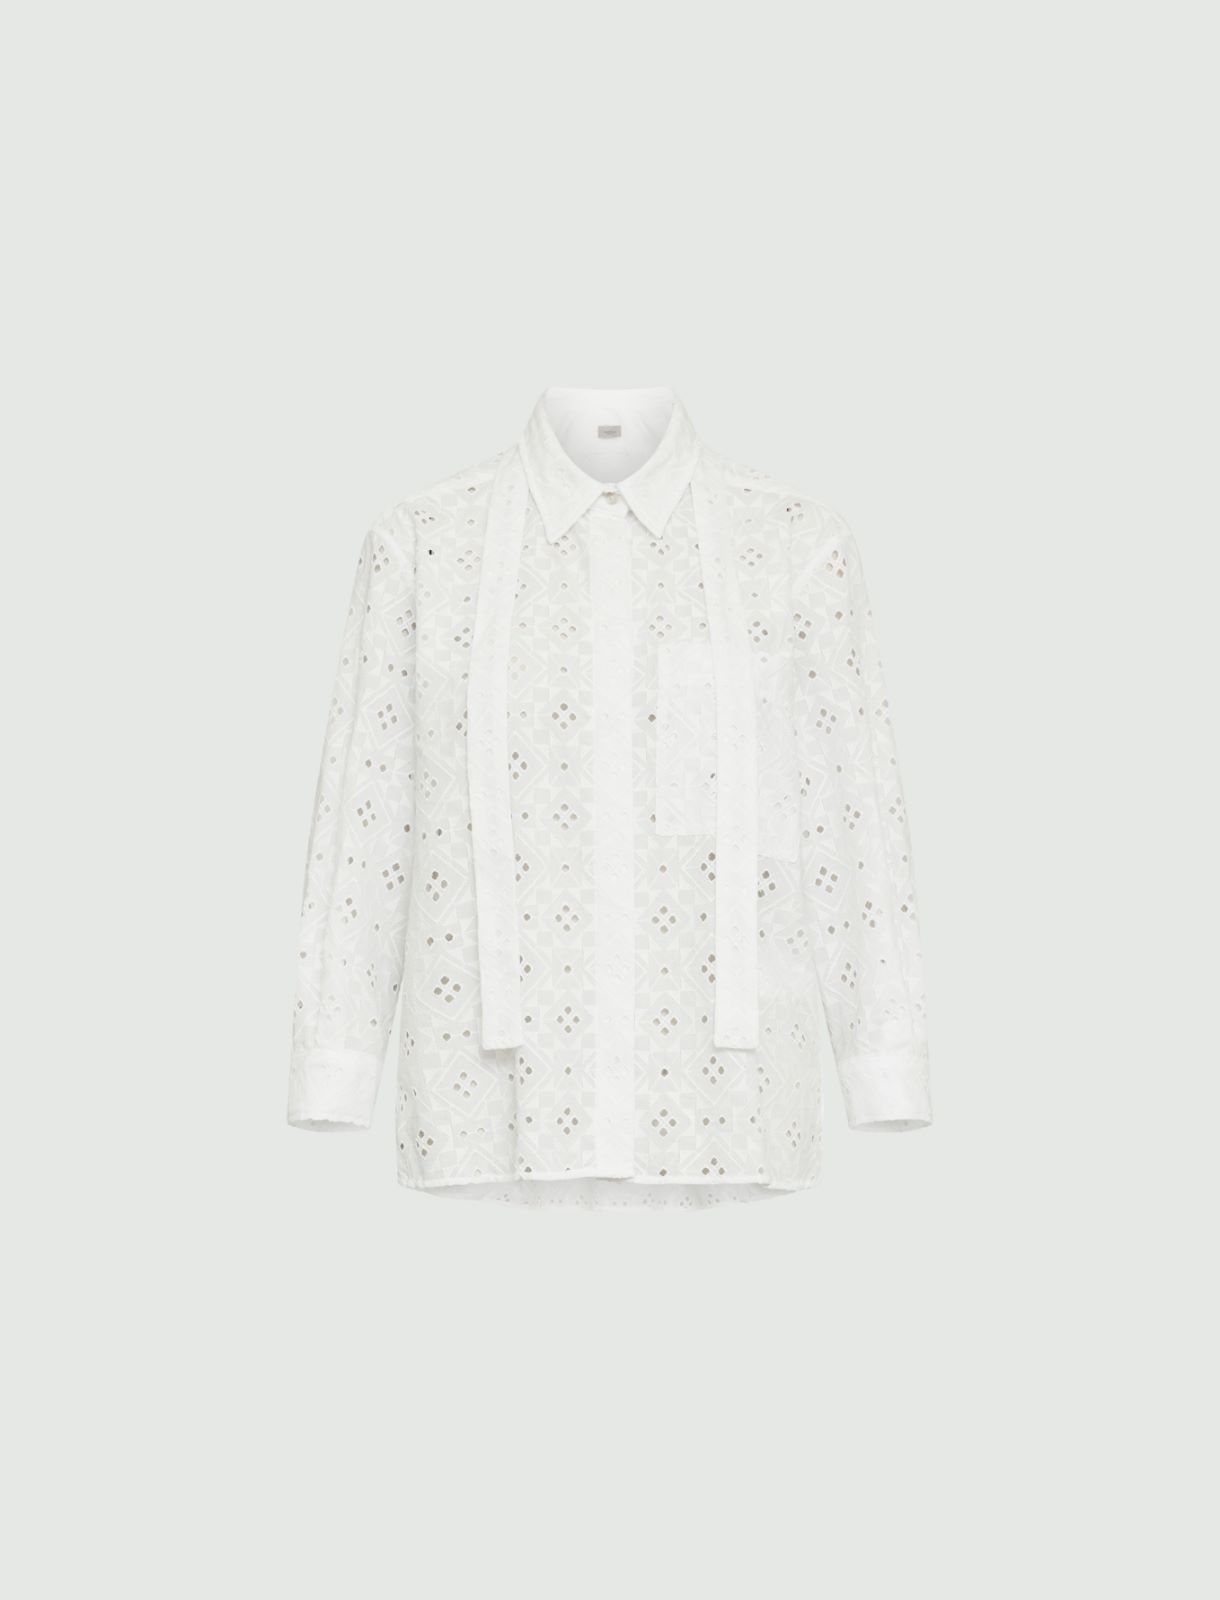 Chemise en broderie anglaise - Blanc - Marella